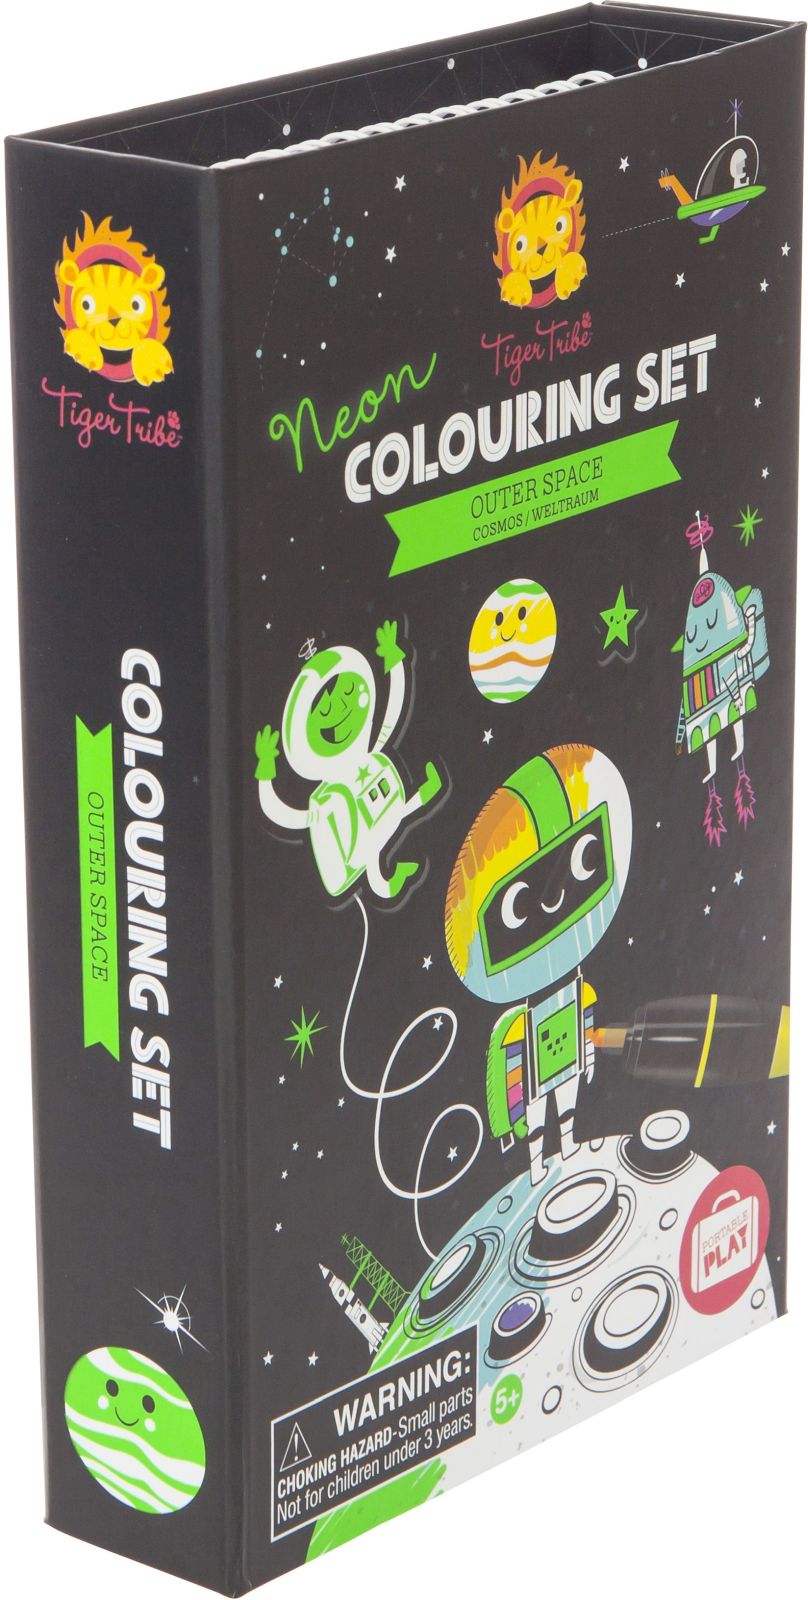 Tiger Tribe Omalovánky Neon Colouring Set - Outer Space